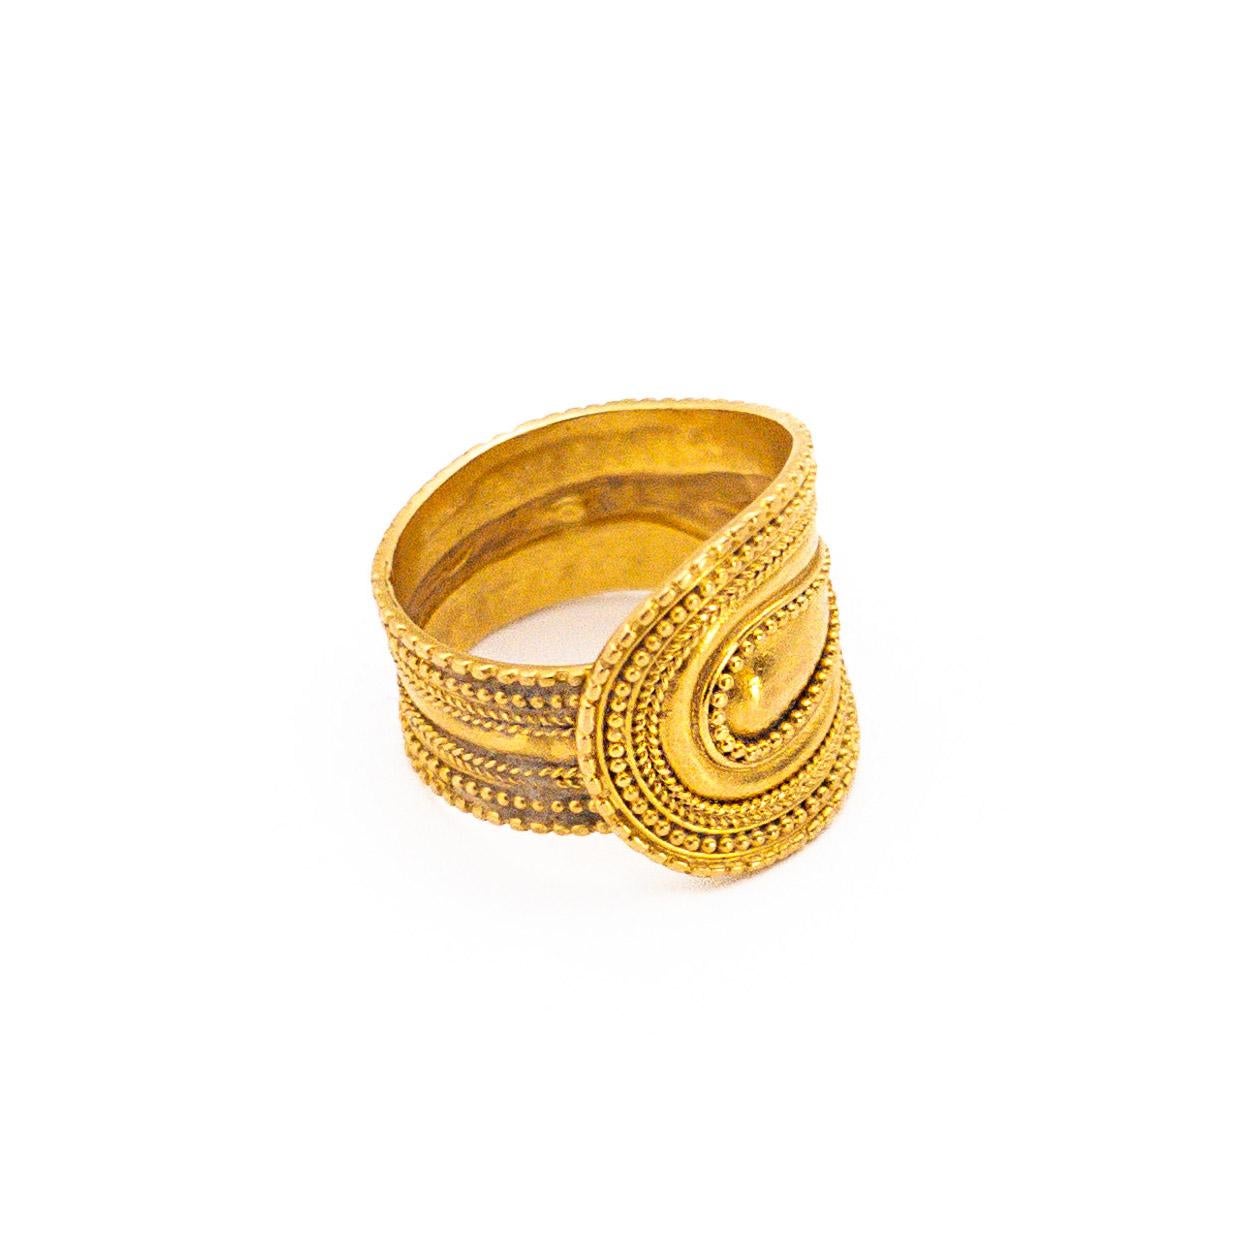 This beautiful 18 K Gold ring has the shape of a spatula lined with filigree, an ancient greek technique. Signed Lalaounis

Lalaounis’ vision became clear: he decided to breathe new life into Greek museum artifacts and transform them into jewelry by